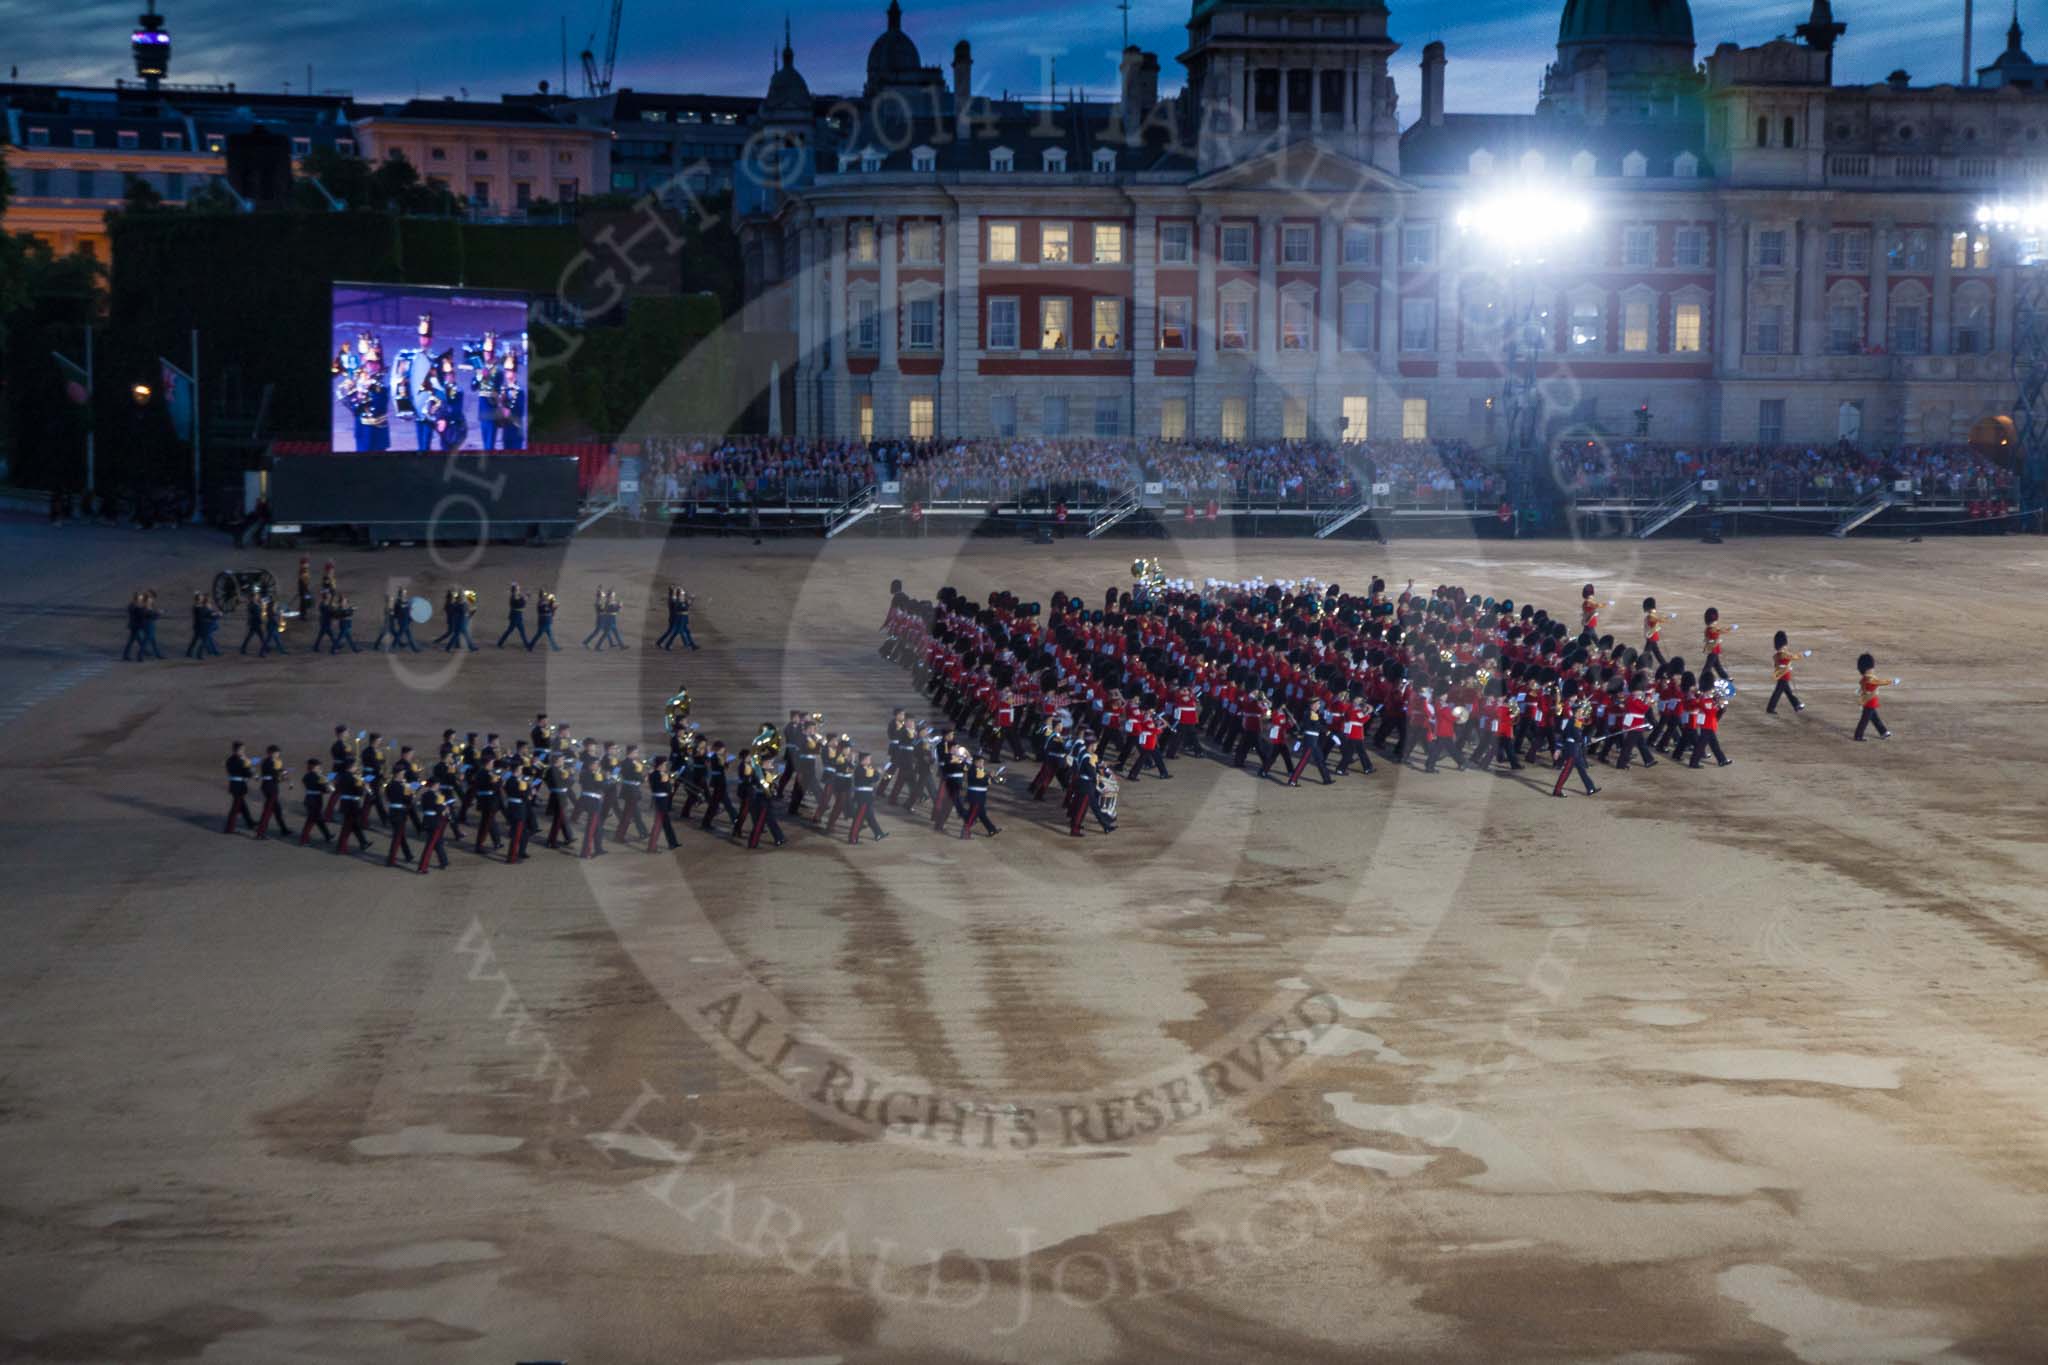 Beating Retreat 2014.
Horse Guards Parade, Westminster,
London SW1A,

United Kingdom,
on 11 June 2014 at 21:38, image #371